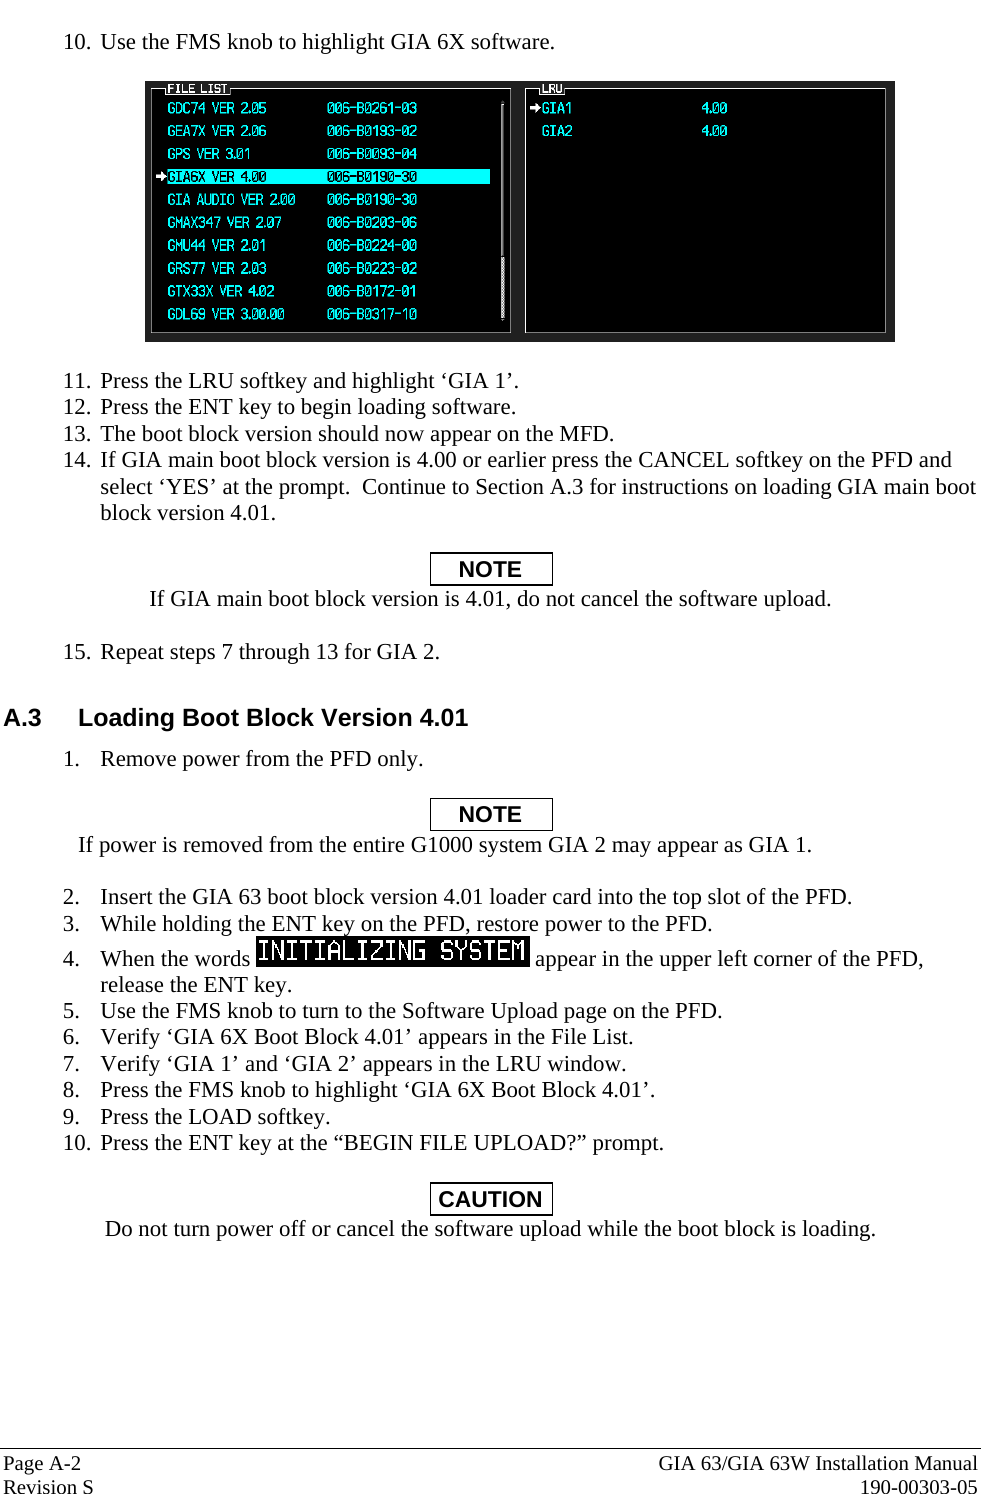  Page A-2  GIA 63/GIA 63W Installation Manual Revision S  190-00303-05 10. Use the FMS knob to highlight GIA 6X software.    11. Press the LRU softkey and highlight ‘GIA 1’. 12. Press the ENT key to begin loading software. 13. The boot block version should now appear on the MFD. 14. If GIA main boot block version is 4.00 or earlier press the CANCEL softkey on the PFD and select ‘YES’ at the prompt.  Continue to Section A.3 for instructions on loading GIA main boot block version 4.01.  NOTE If GIA main boot block version is 4.01, do not cancel the software upload.  15. Repeat steps 7 through 13 for GIA 2.  A.3  Loading Boot Block Version 4.01 1. Remove power from the PFD only.  NOTE If power is removed from the entire G1000 system GIA 2 may appear as GIA 1.  2. Insert the GIA 63 boot block version 4.01 loader card into the top slot of the PFD. 3. While holding the ENT key on the PFD, restore power to the PFD. 4. When the words   appear in the upper left corner of the PFD, release the ENT key. 5. Use the FMS knob to turn to the Software Upload page on the PFD. 6. Verify ‘GIA 6X Boot Block 4.01’ appears in the File List. 7. Verify ‘GIA 1’ and ‘GIA 2’ appears in the LRU window. 8. Press the FMS knob to highlight ‘GIA 6X Boot Block 4.01’. 9. Press the LOAD softkey. 10. Press the ENT key at the “BEGIN FILE UPLOAD?” prompt.  CAUTION Do not turn power off or cancel the software upload while the boot block is loading. 